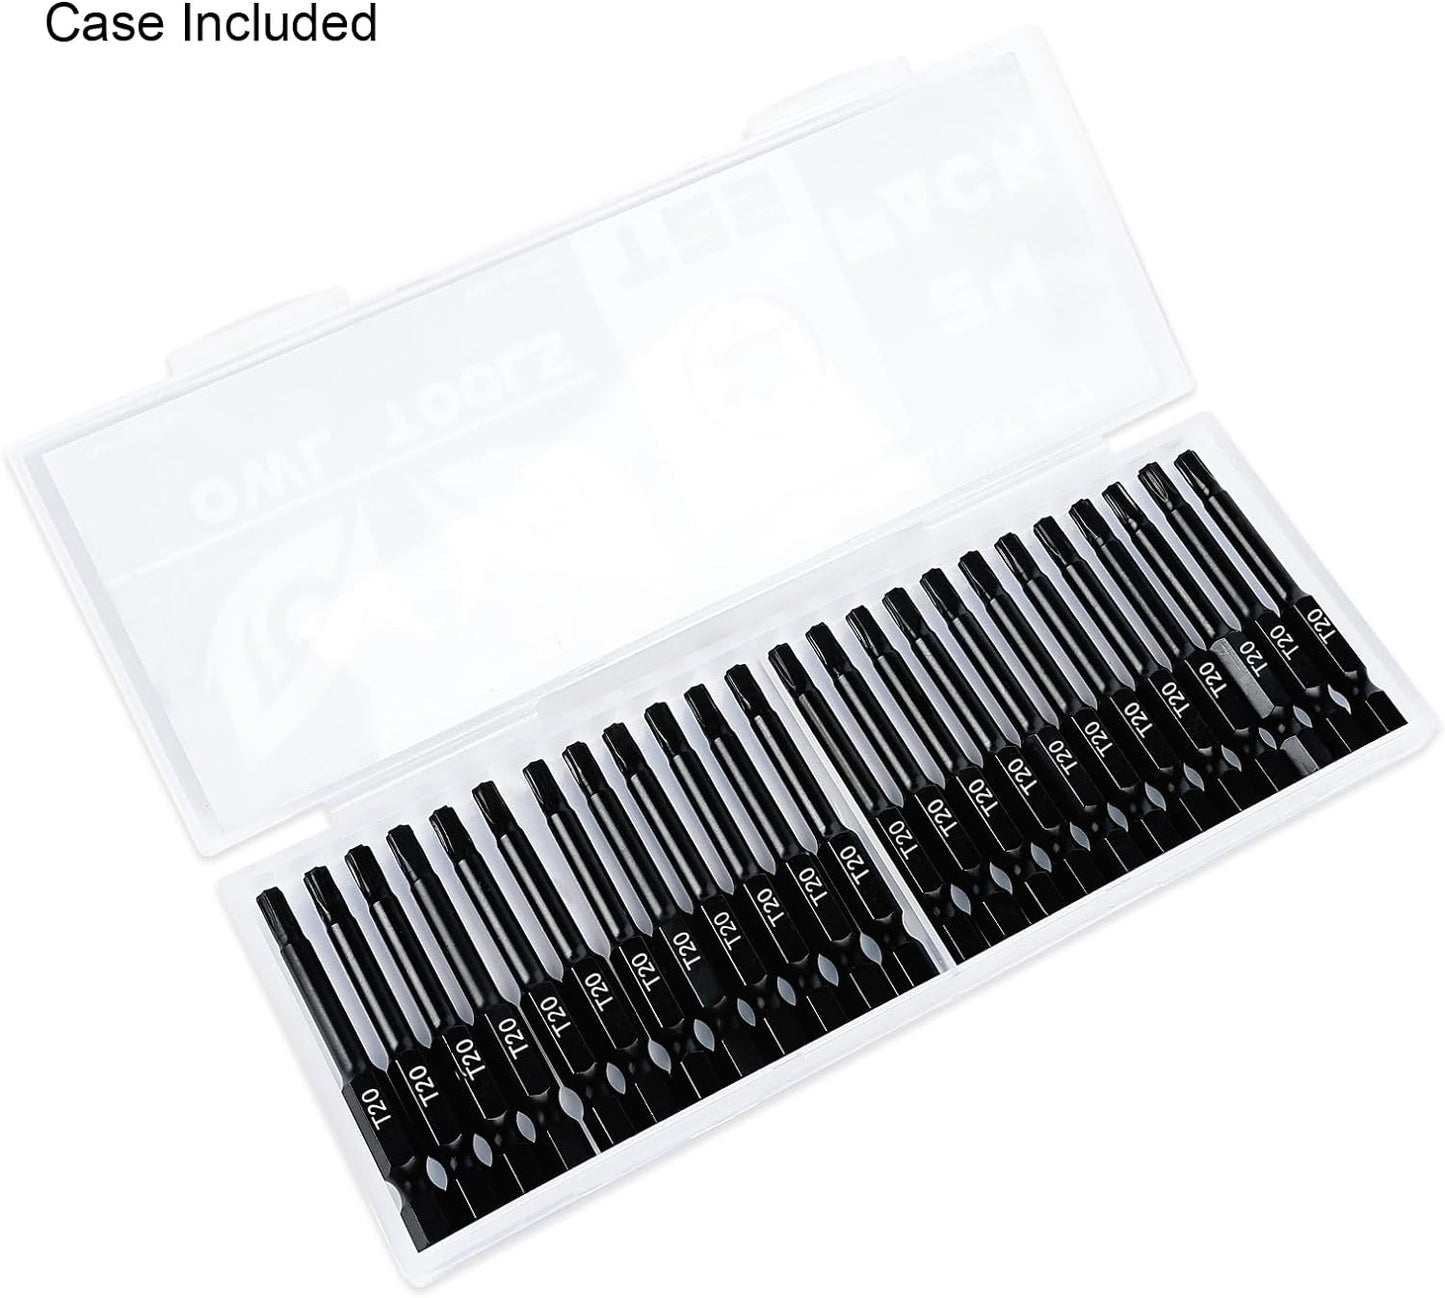 25 Torx Bits, T15,T20,T25,T27,T30,T35,T40 (24 Pack - 2 Inch Impact Grade) 8 Point Torx Star Bit with Hex Shank - Hardened CRM Steel Alloy - Case Included